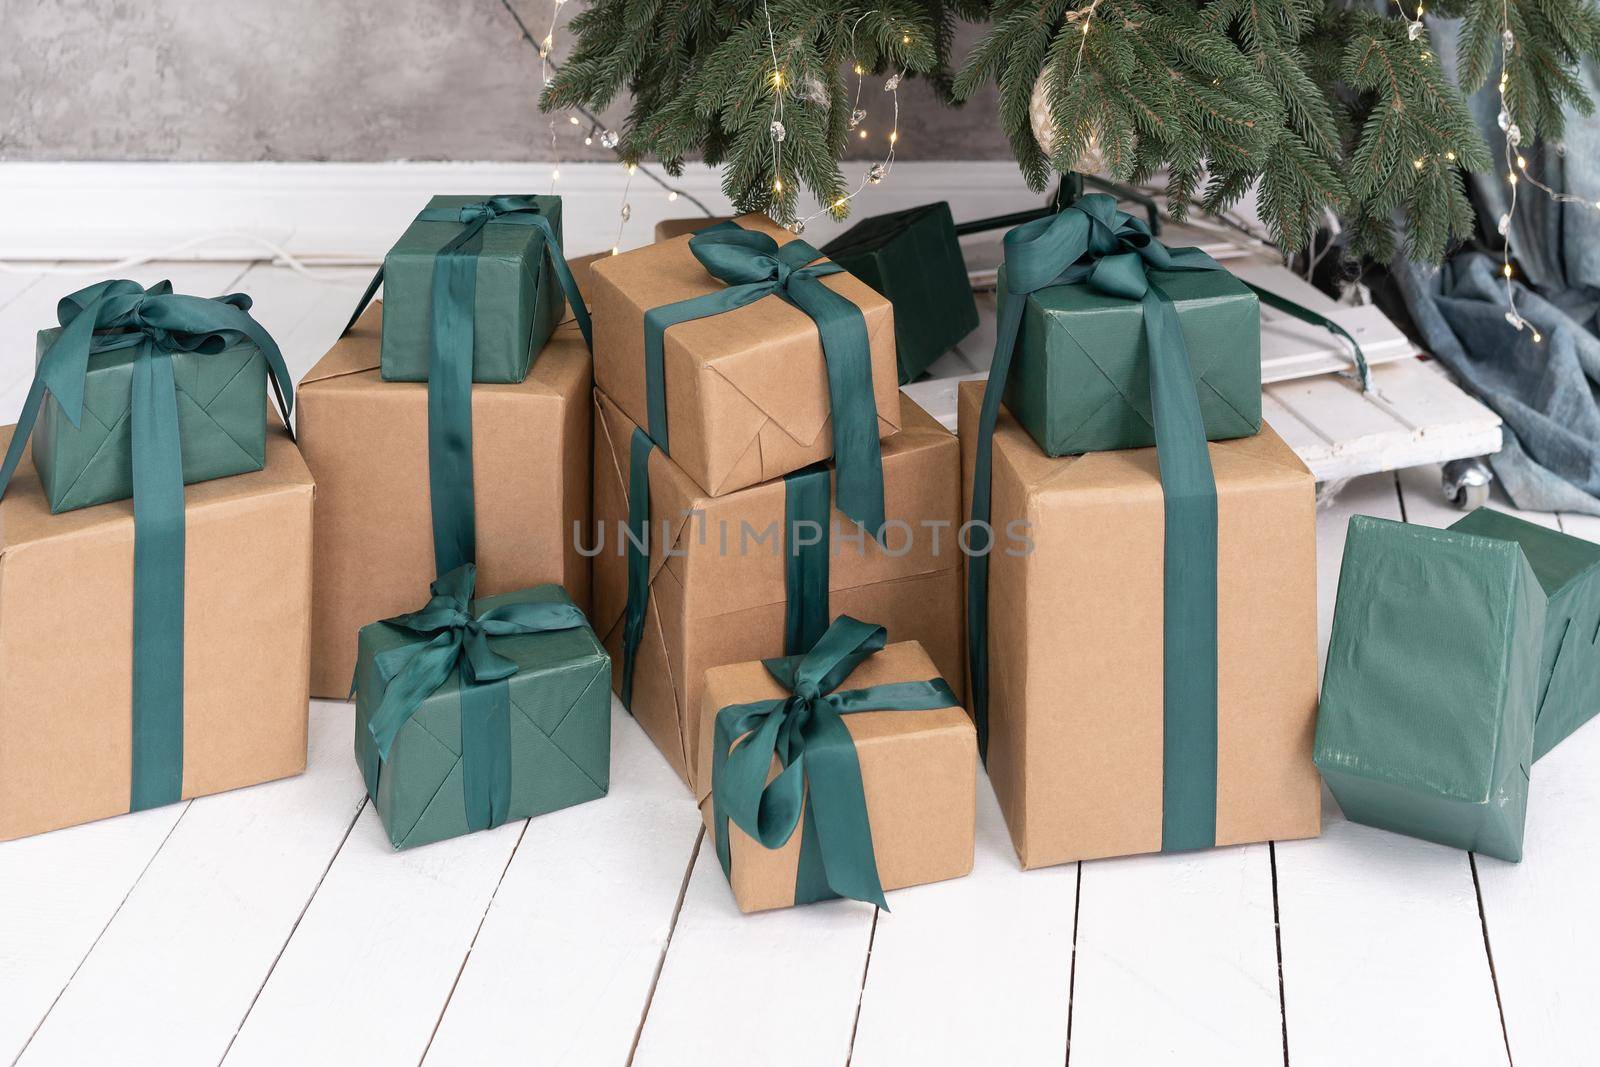 New Year gifts under Christmas tree. Boxes packed in craft and green paper at white floor. Atmosphere of festive surprise by LipikStockMedia